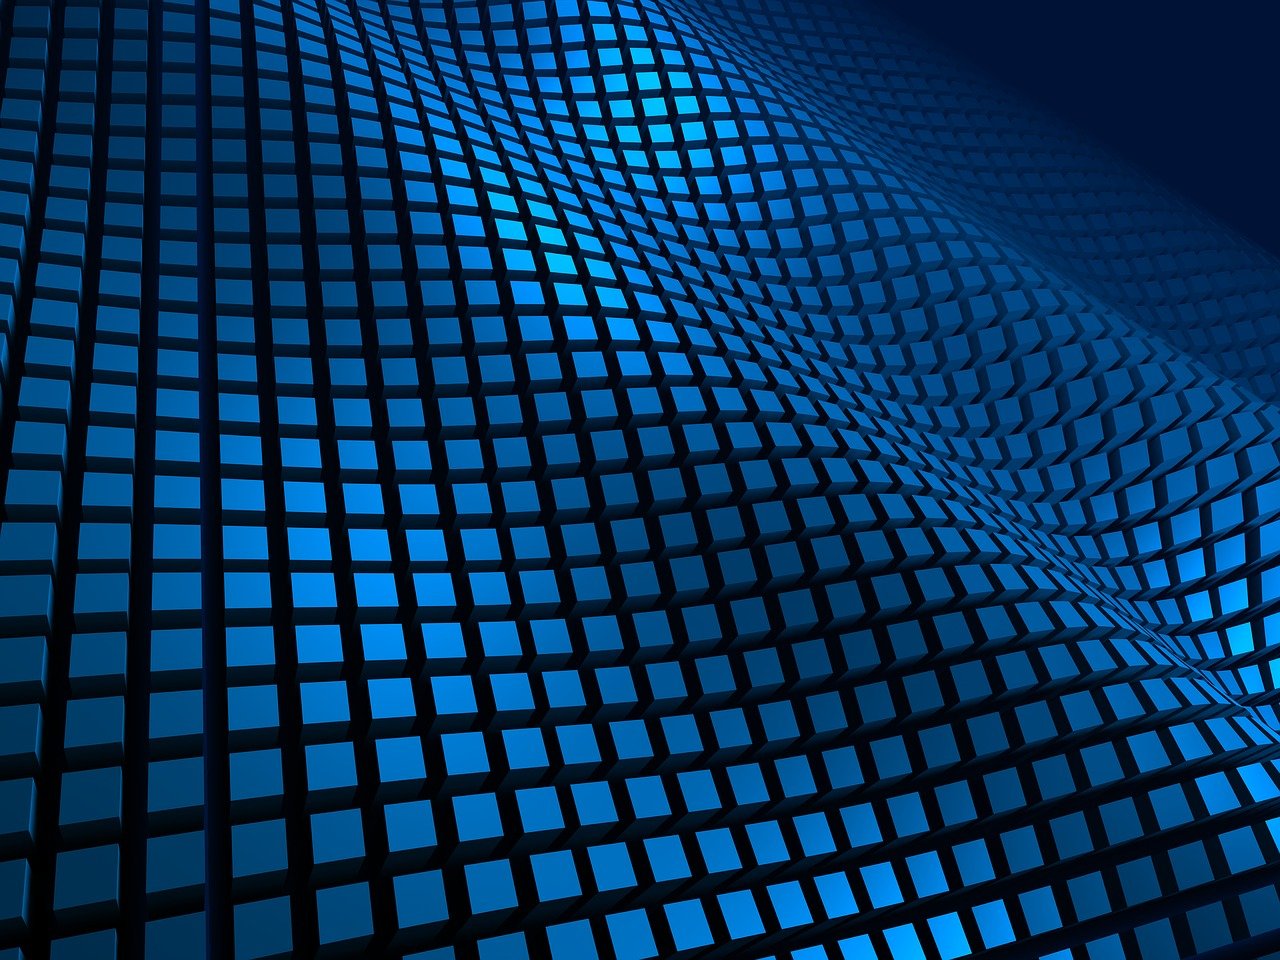 abstract image - blue blocks in a wavy grid